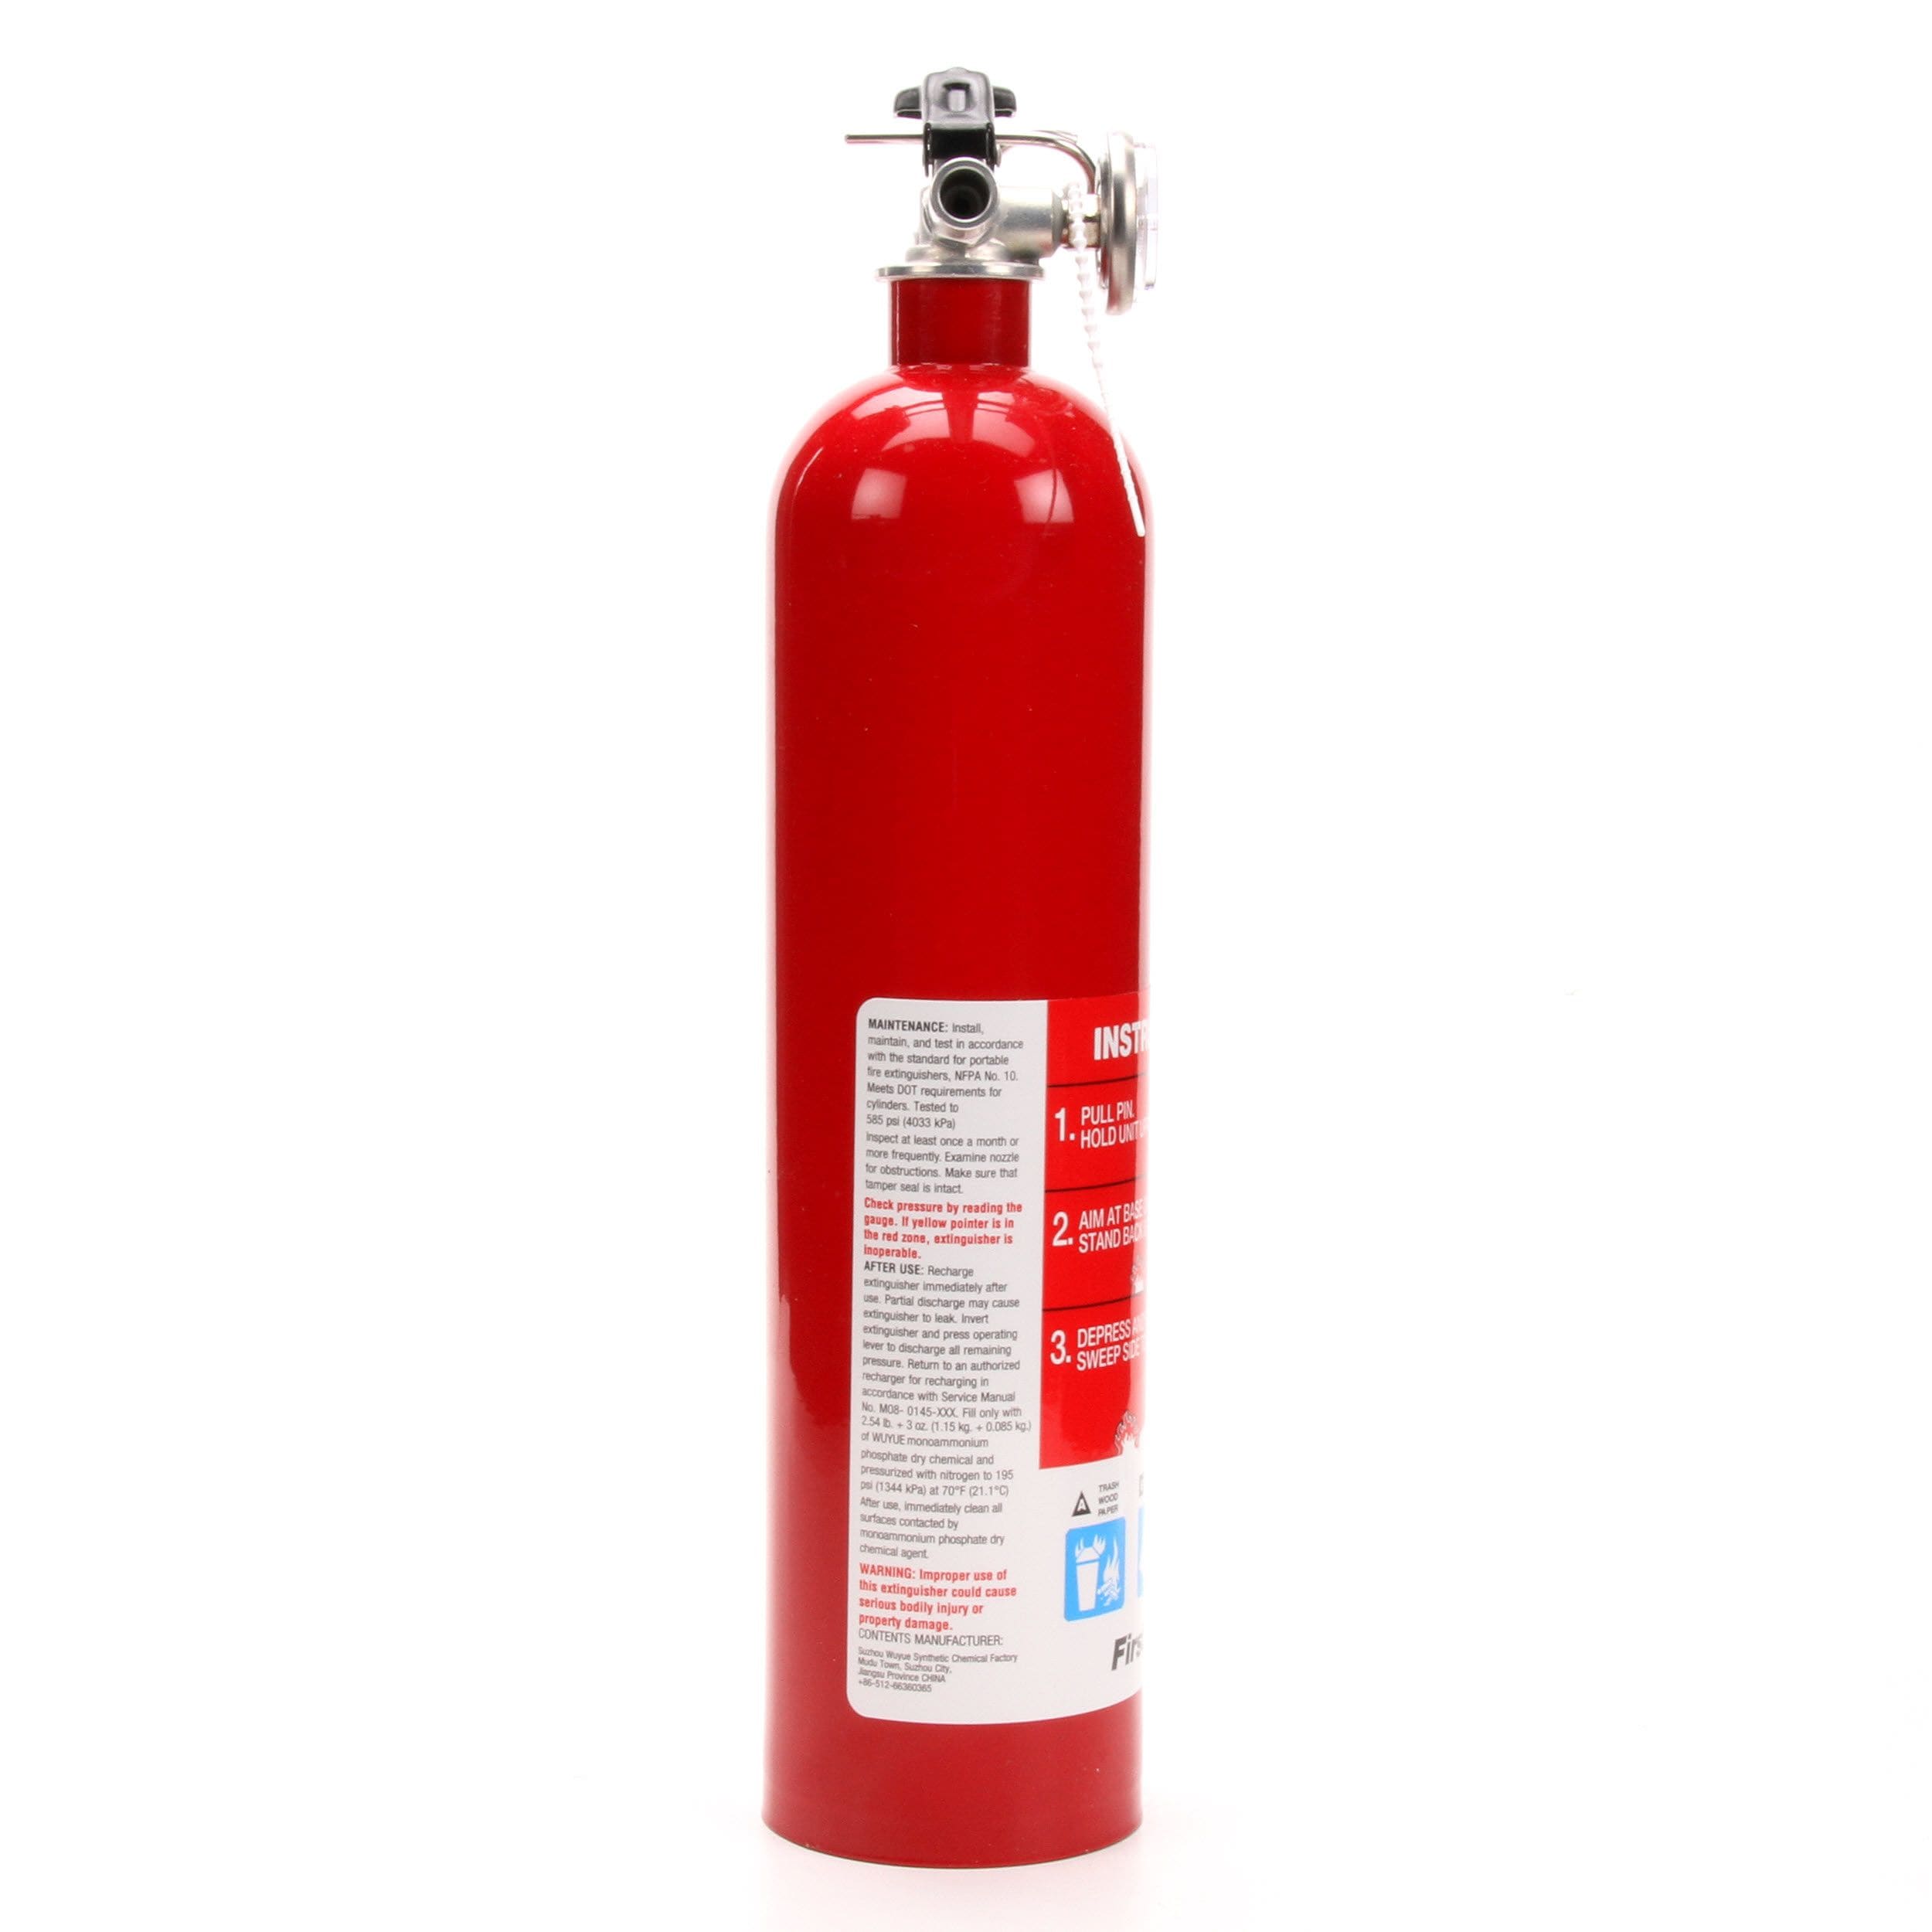 First Alert HOME1 ABC 2.5 Pound Rechargeable Fire Extinguisher-HOME1-1-A:10-B:C-10-Year Warranty